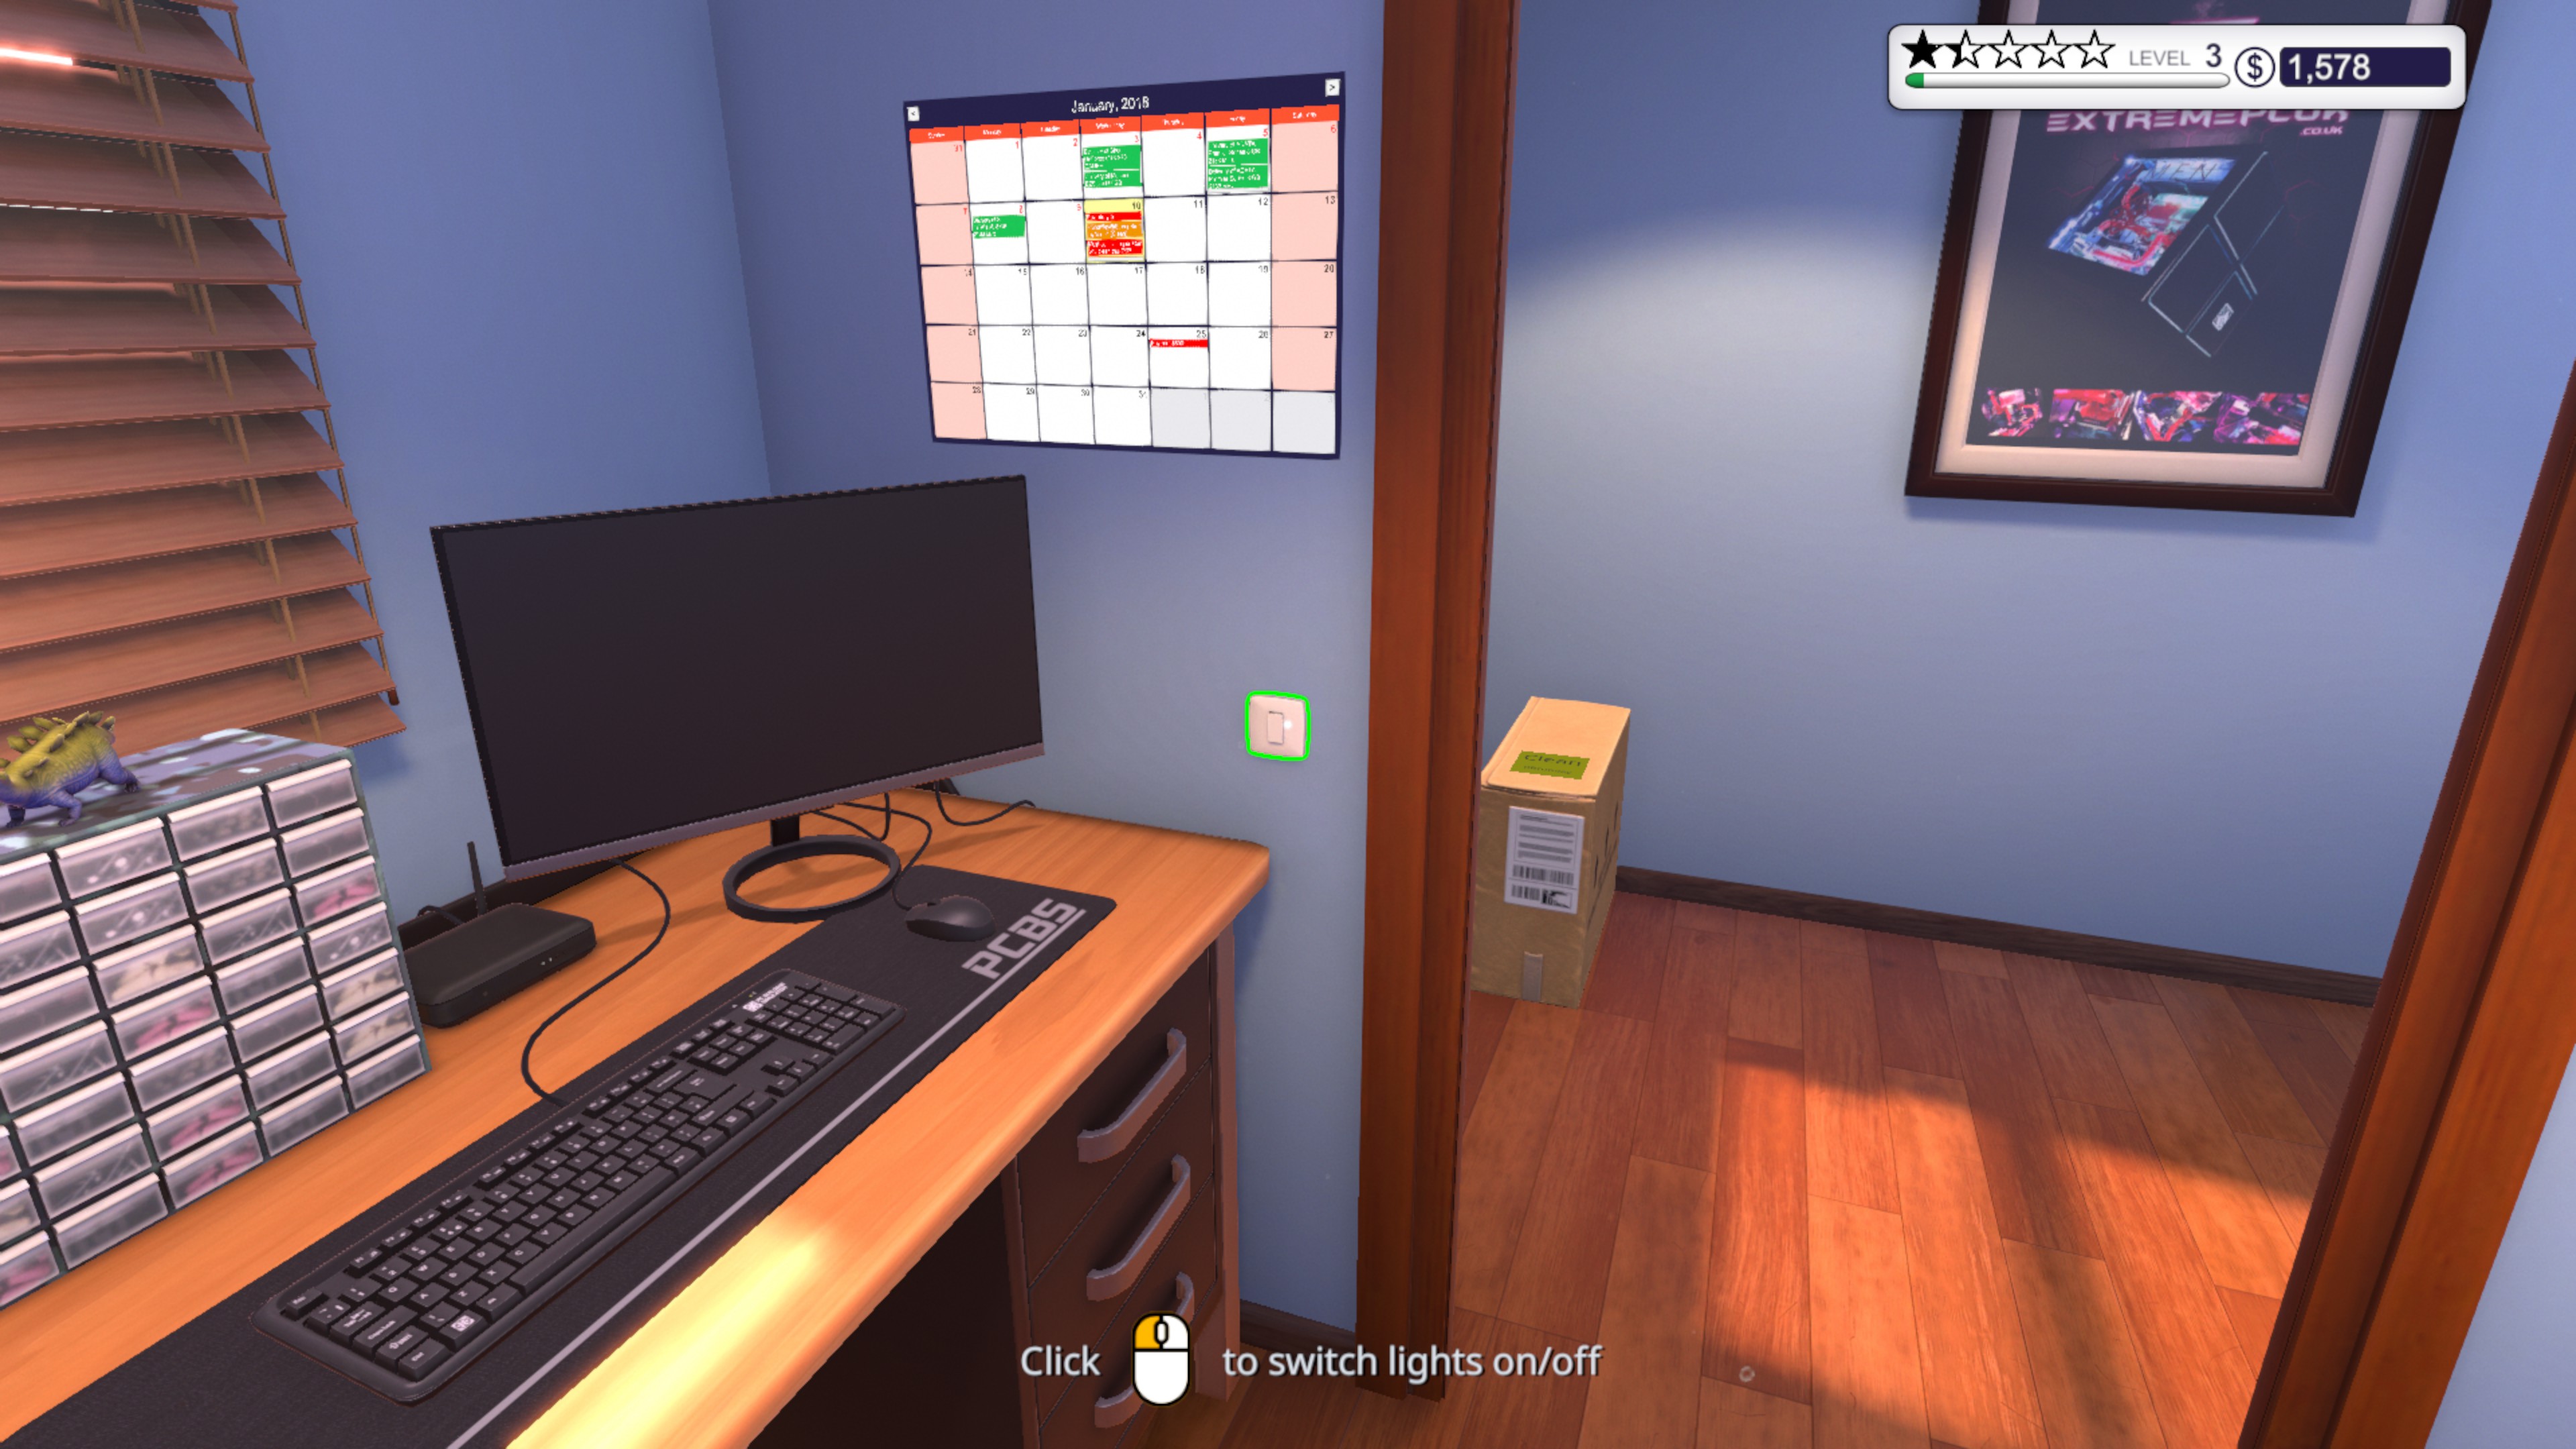 5 Developer Tips For Playing Pc Building Simulator Like A Pro